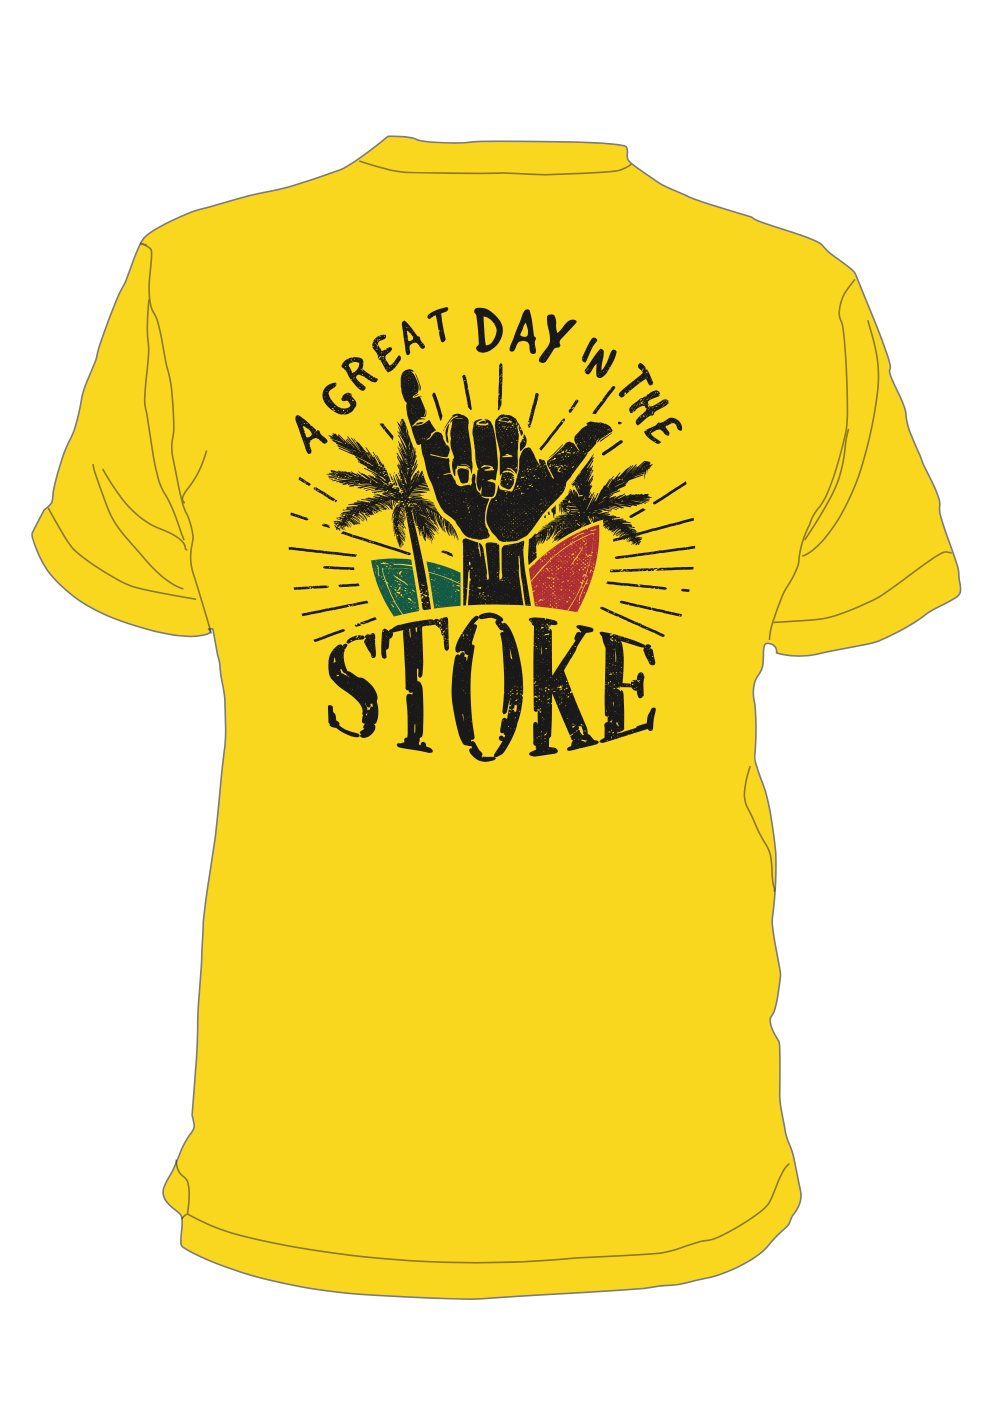 2023 'A GREAT DAY IN THE STOKE' T-Shirts